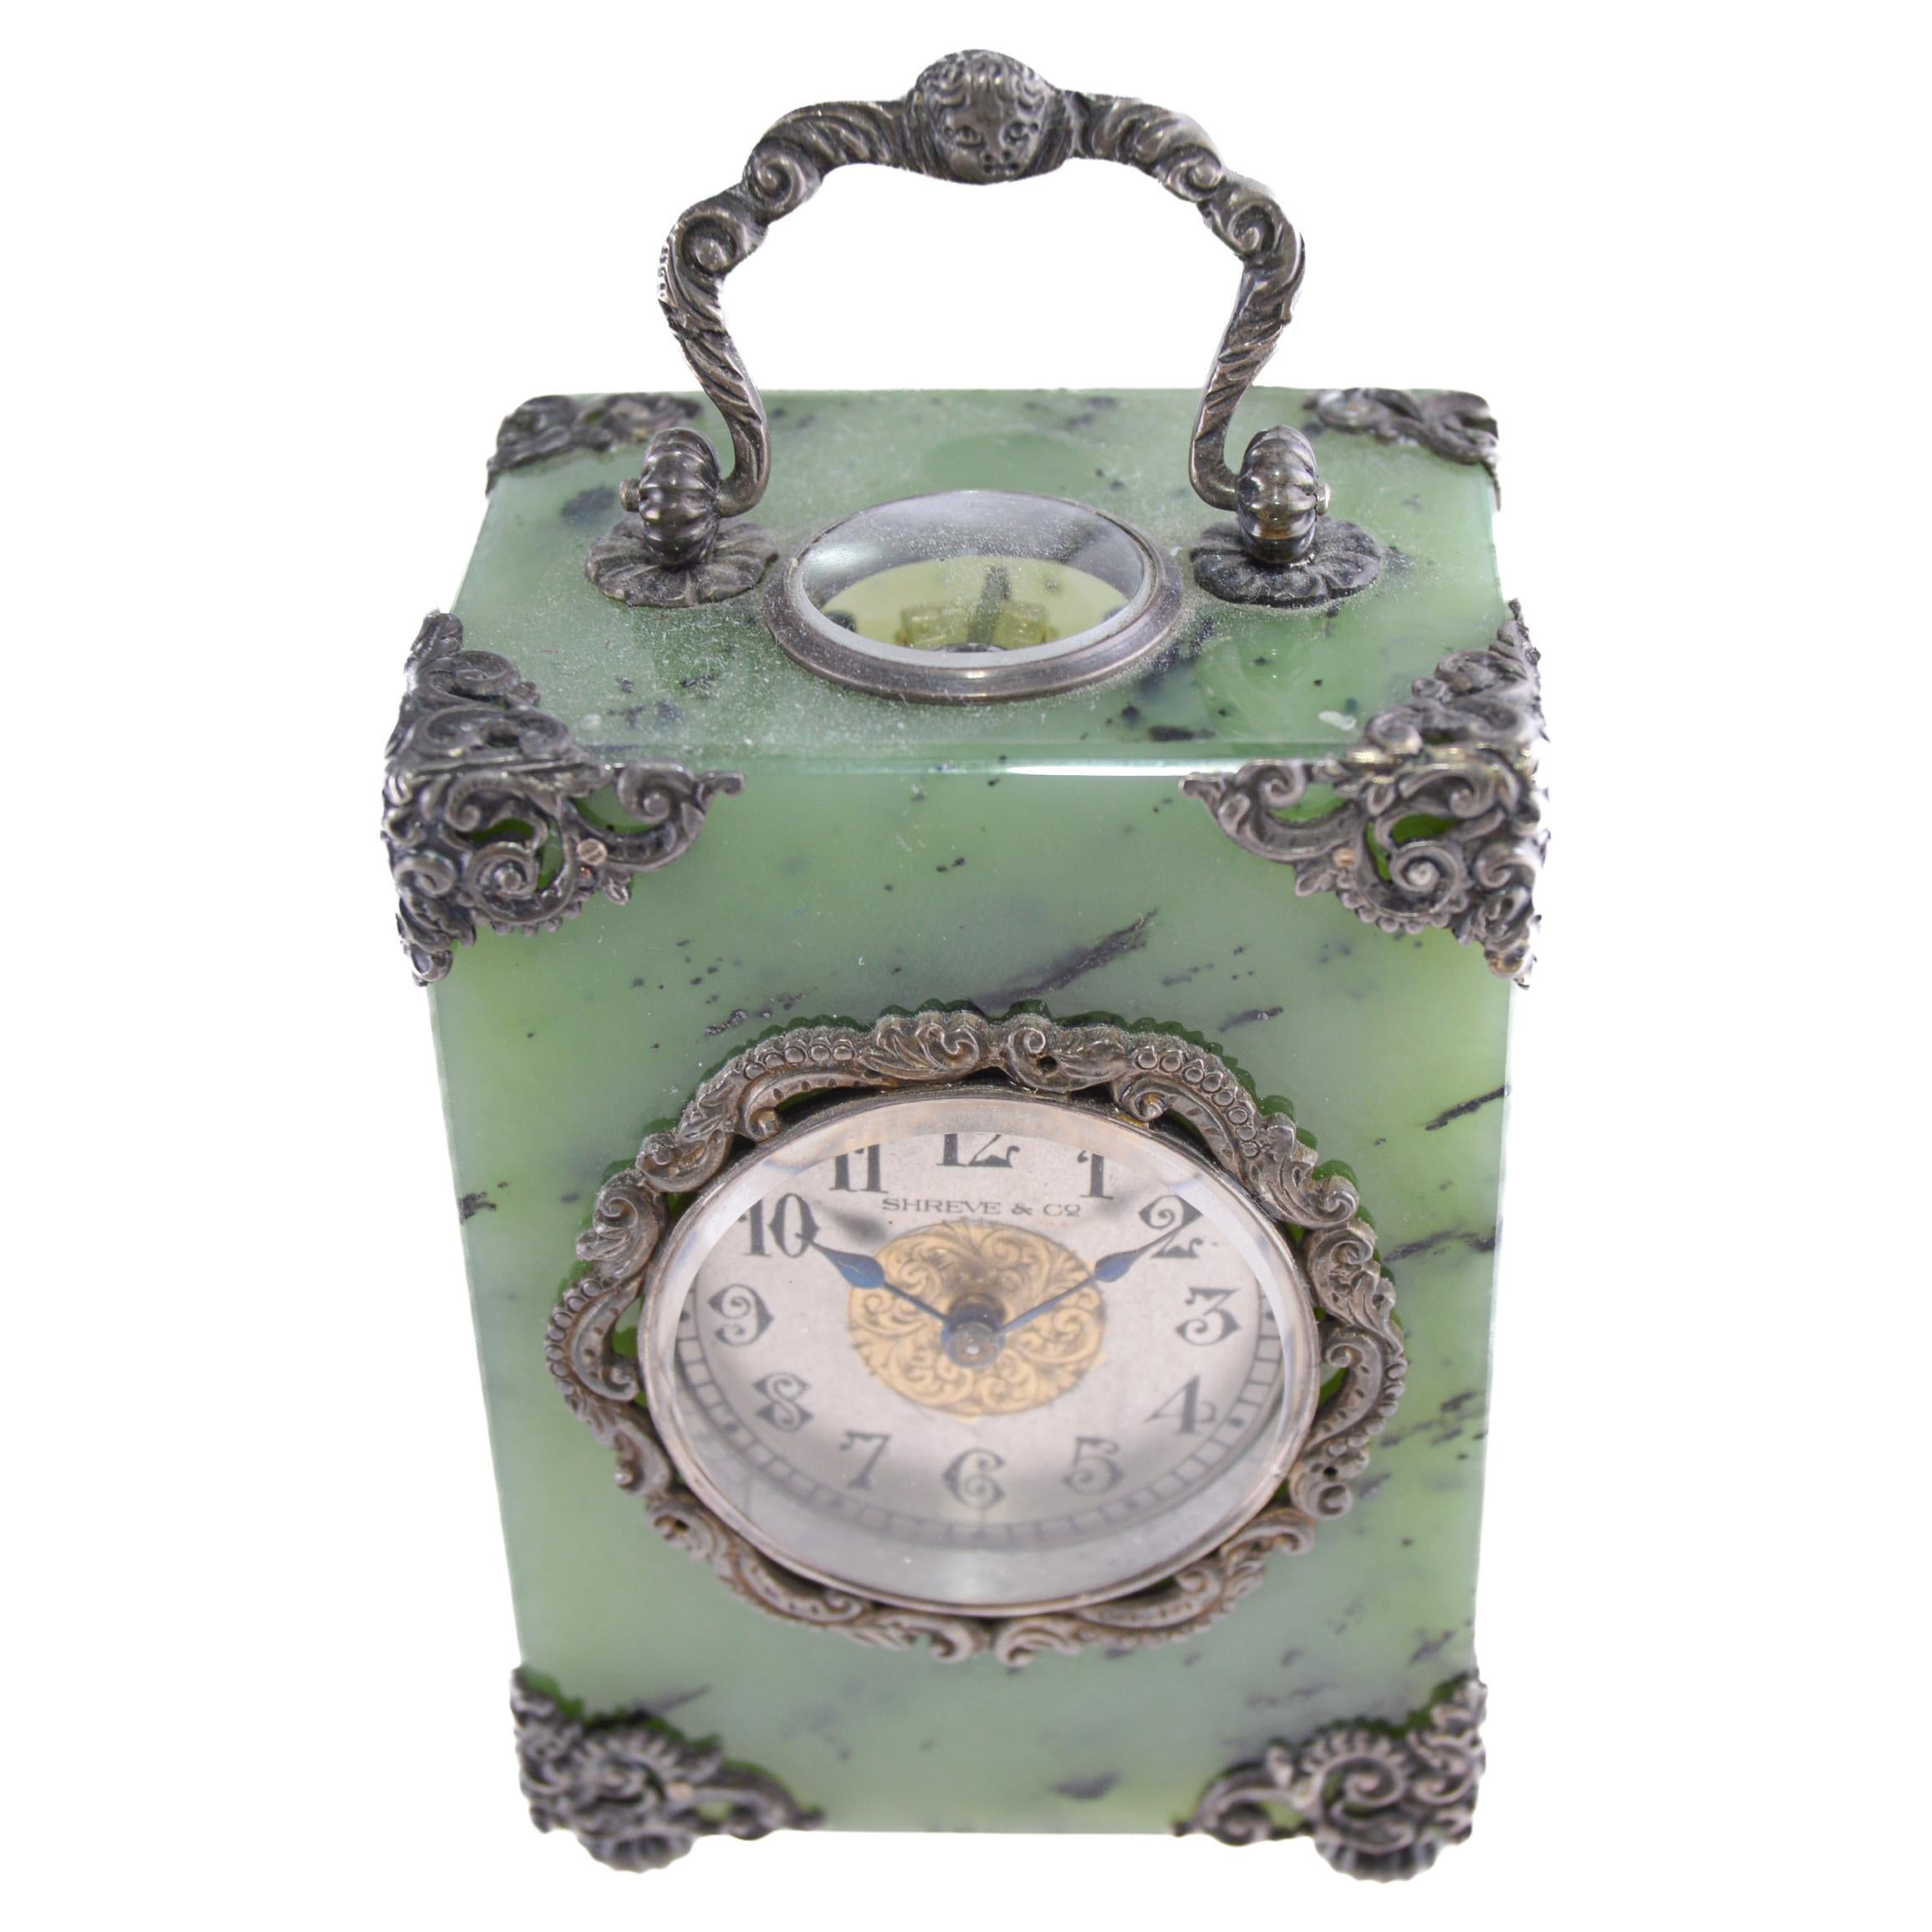 Shreve & Co Jade Carriage Clock with Exposed Escapement Sterling Hardware 1915 1